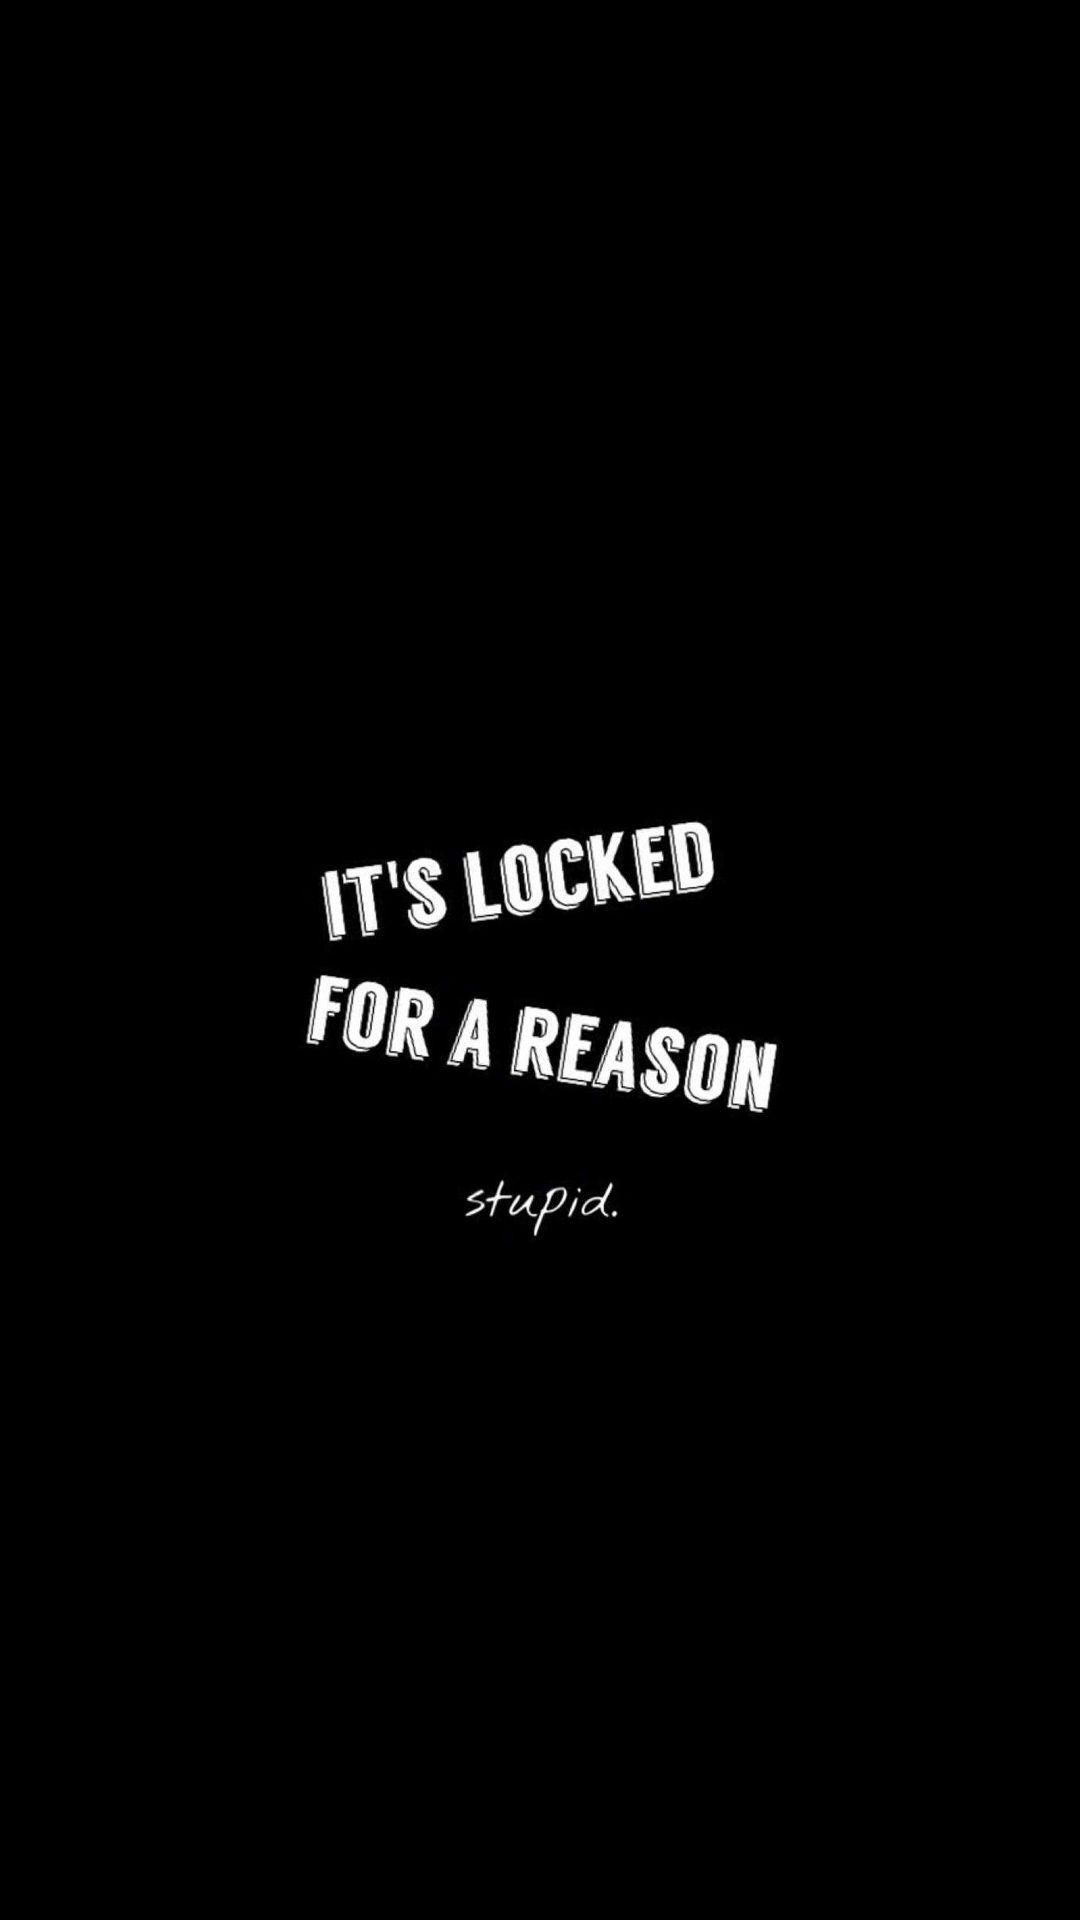 Locked For A Reason Stupid Android Wallpaper. Mobile wallpaper android, Funny phone wallpaper, Android wallpaper